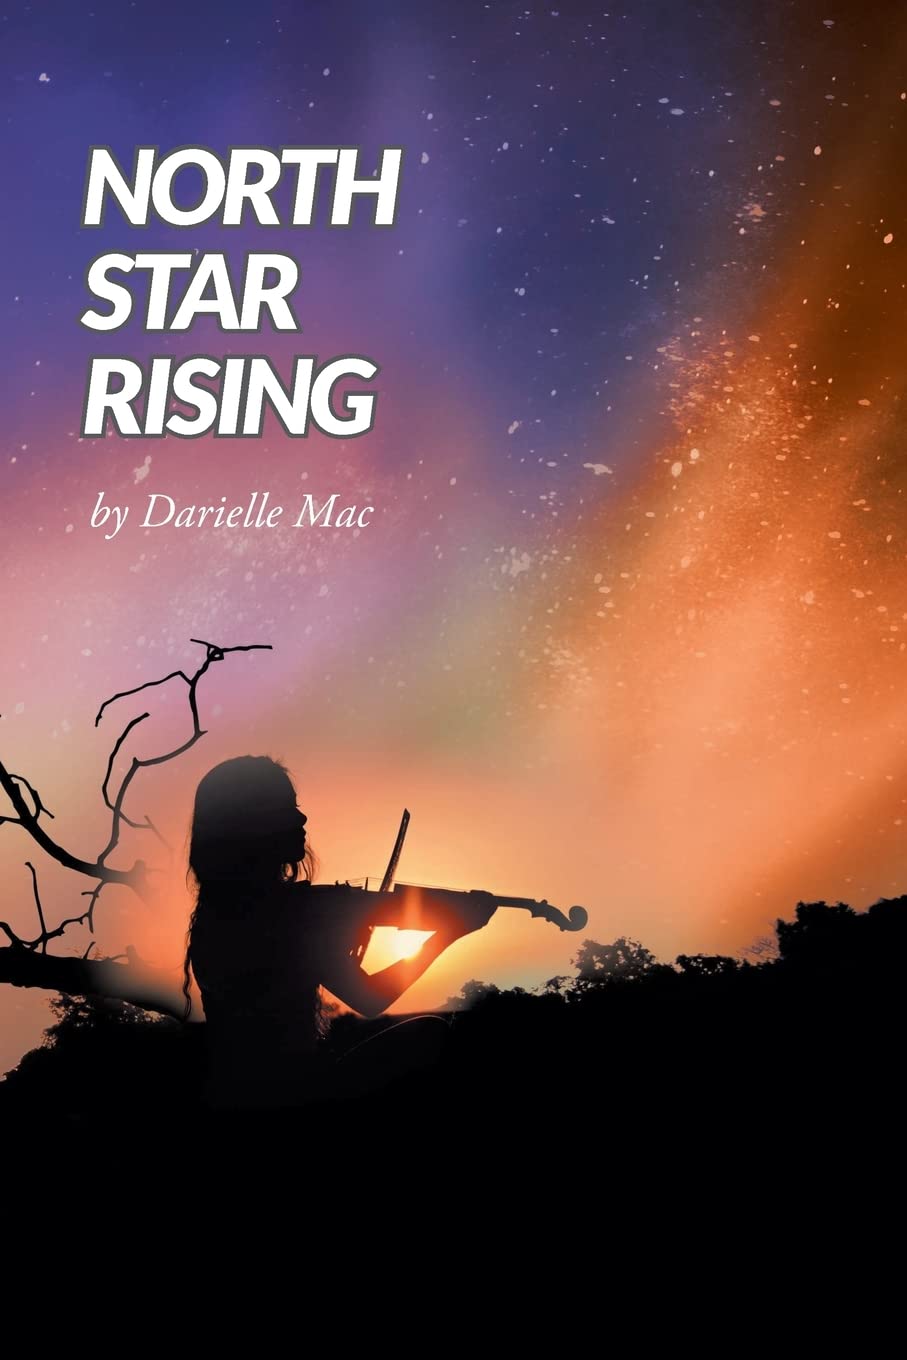 New YA novel "North Star Rising" by Darielle Mac is released, a coming of age fantasy story of magic, family, and discovering destiny